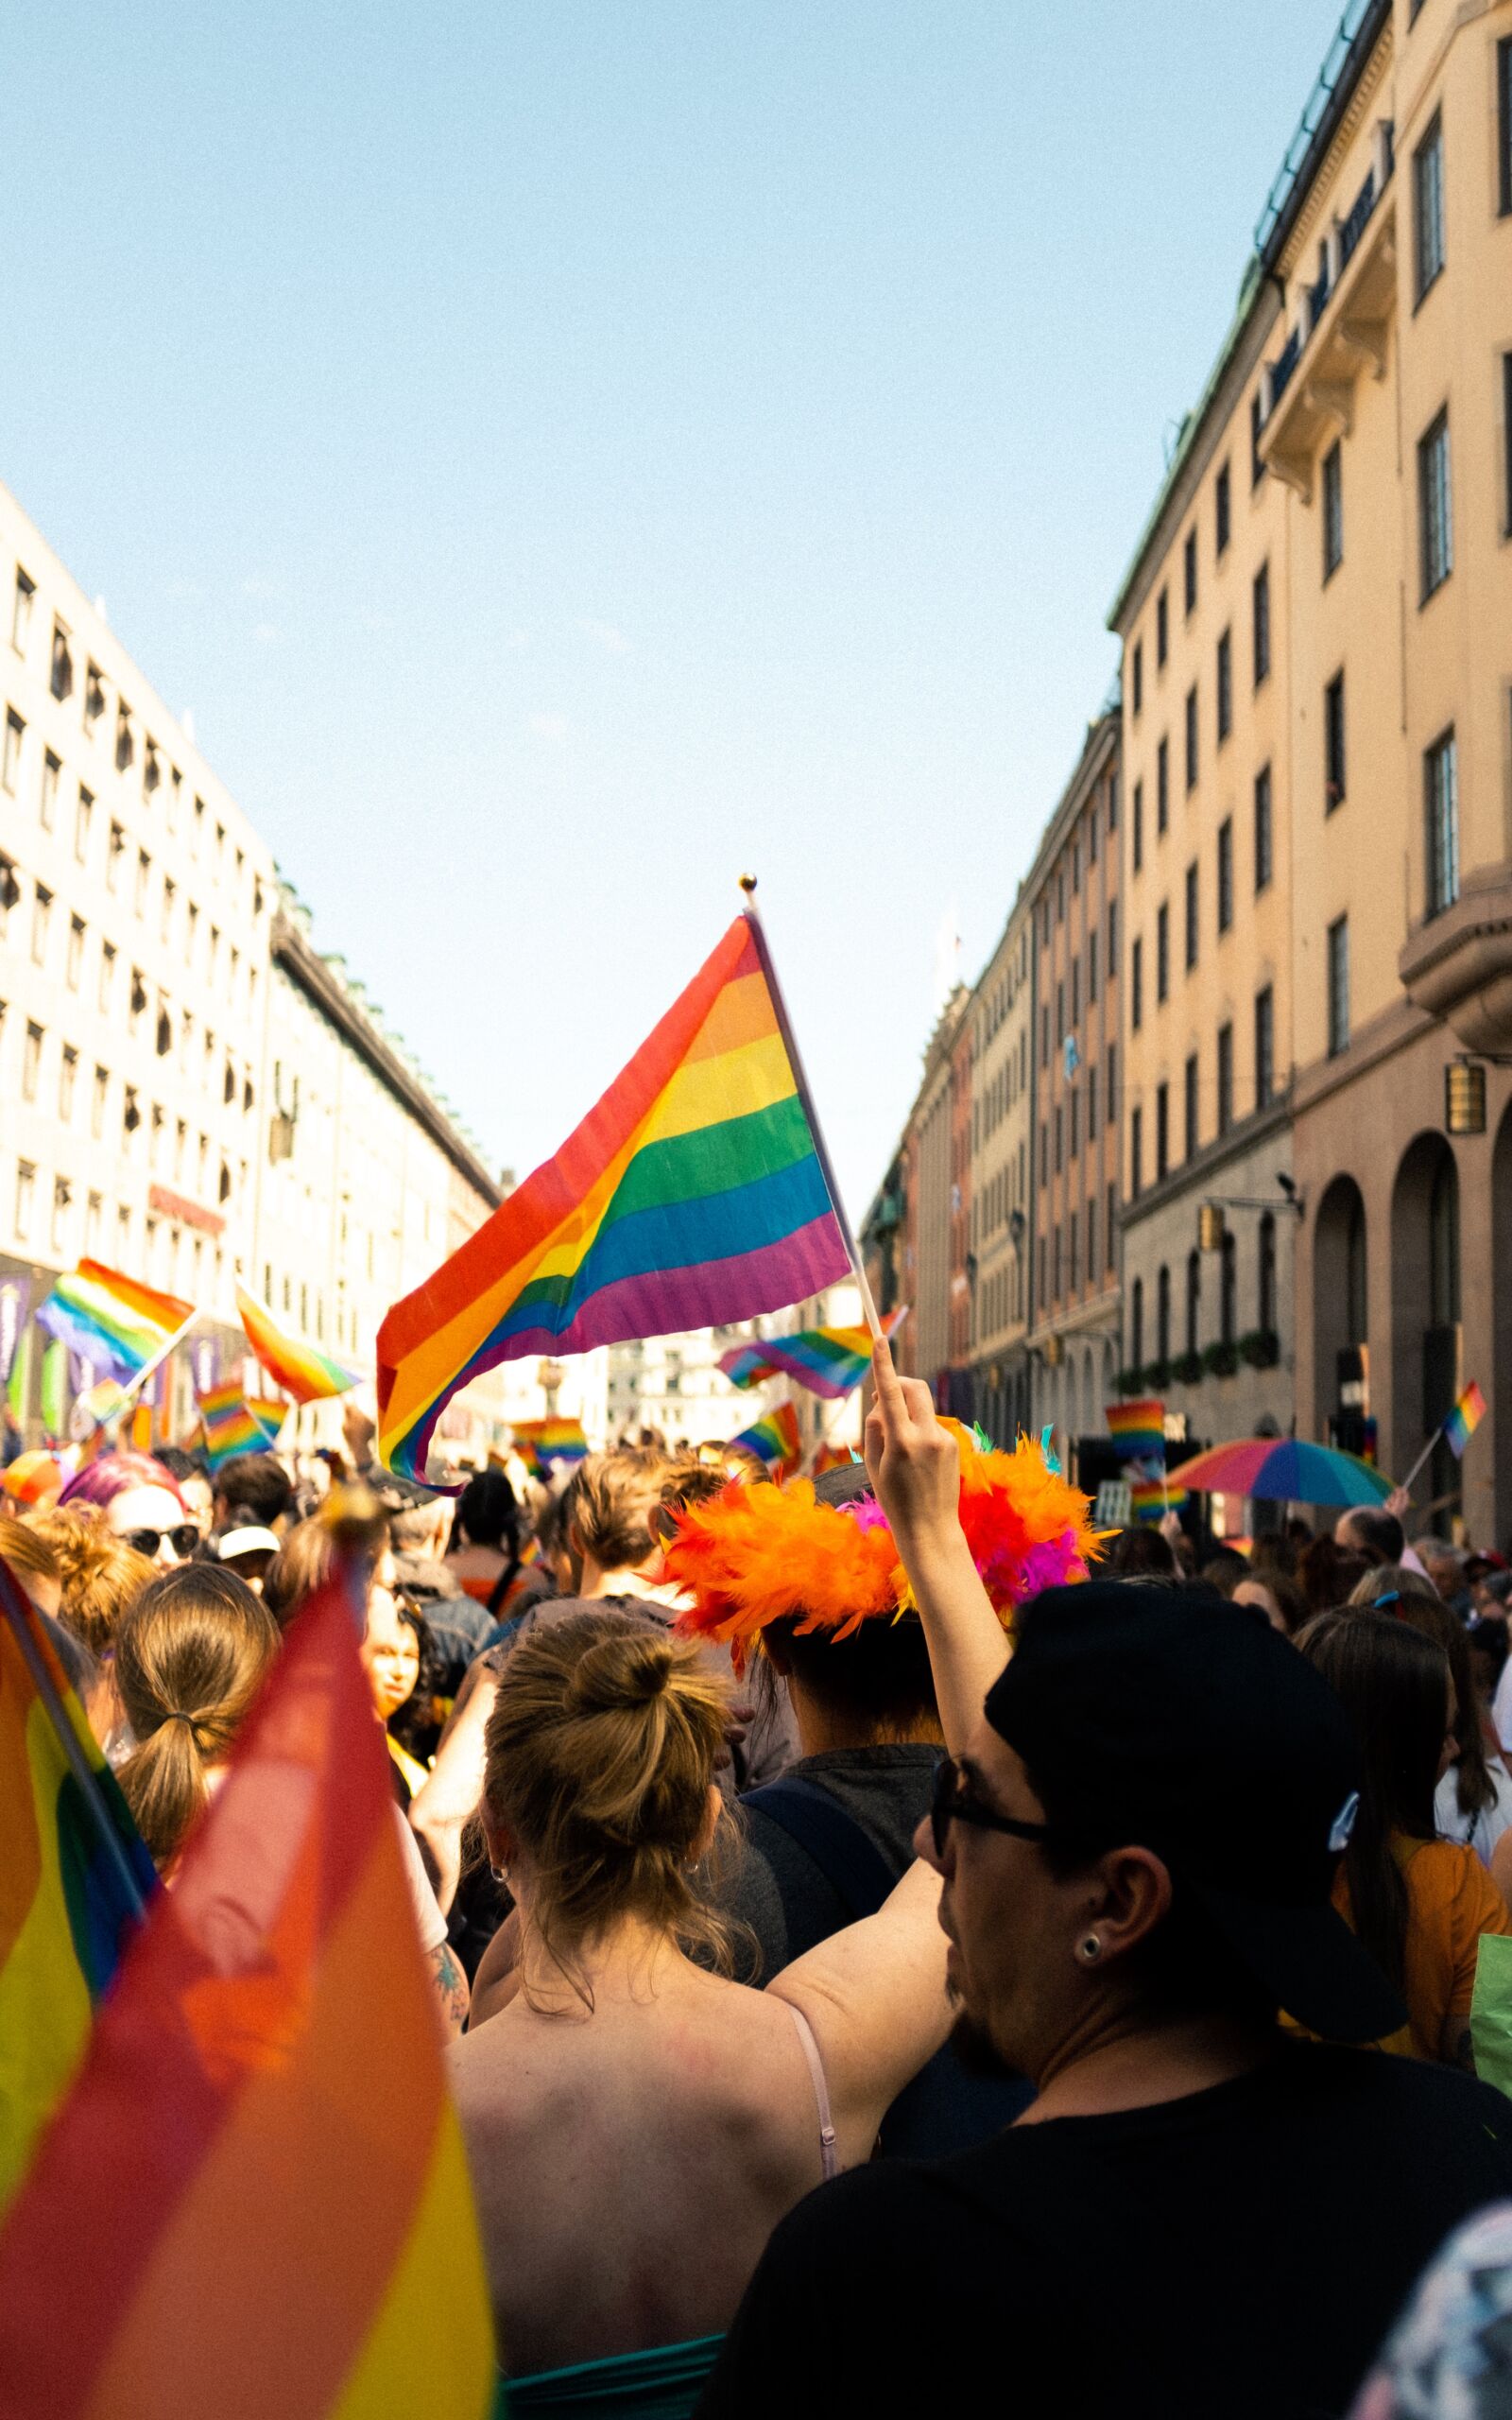 People marching down a street holding rainbow flags